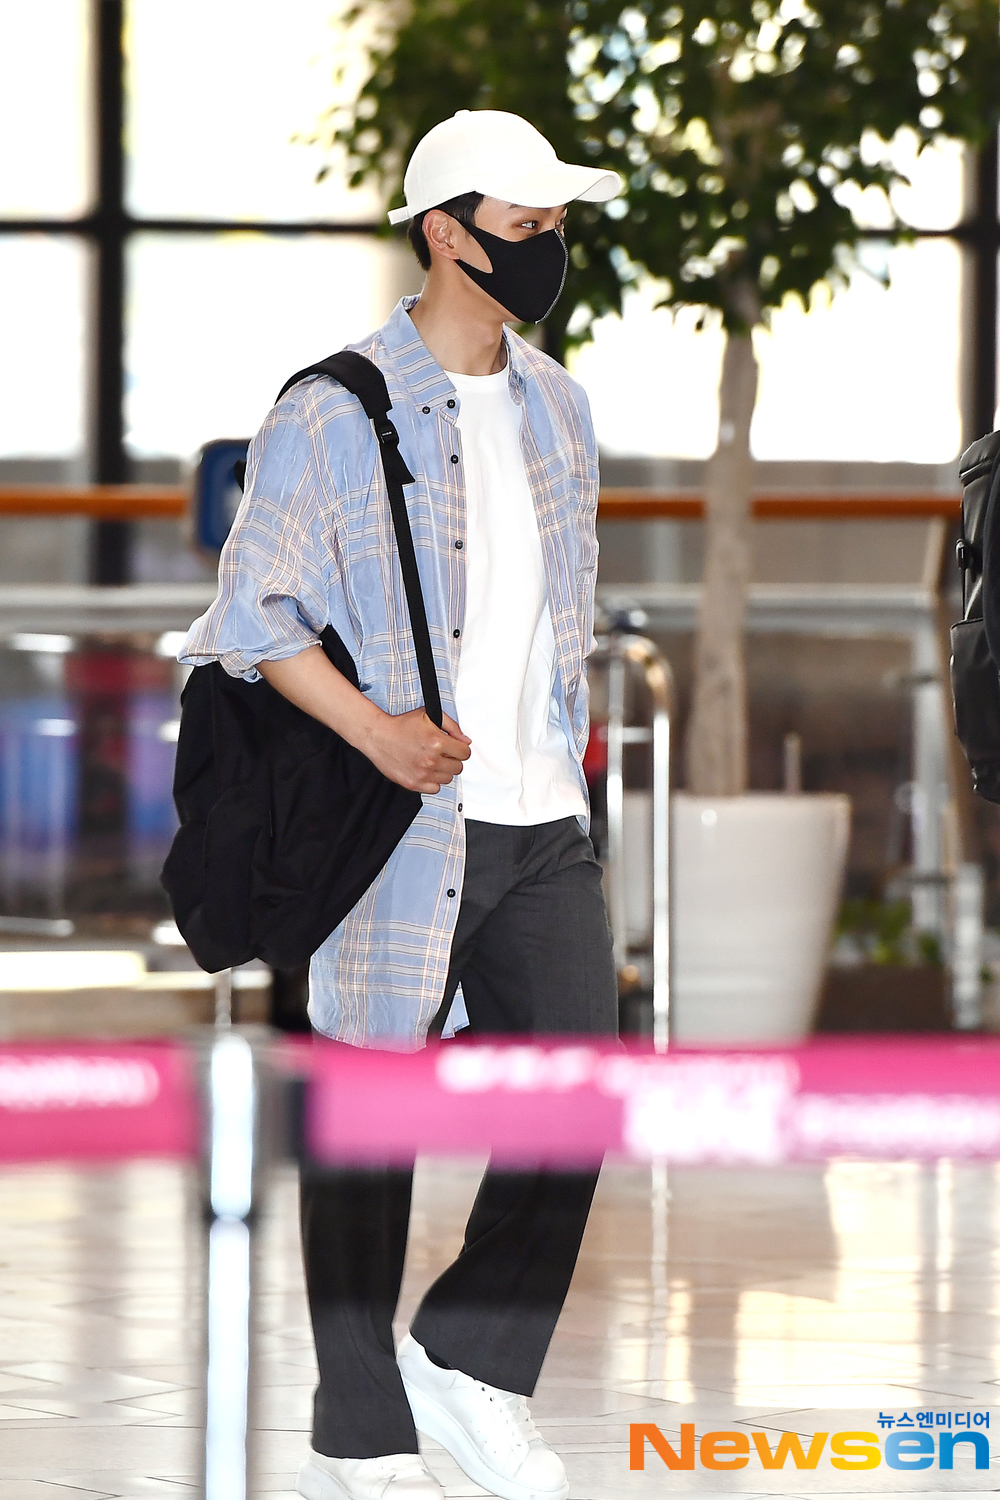 Actor Yeo Jin-goo (Yeo Jin-goo) departed for Japan Tokyo Haneda, a schedule for overseas fan meetings, at JAPAN FANMEETING 2019 - Brilliant Spring Day-, which will be held in Japan via Gimpo International Airport in Banghwa-dong, Gangseo-gu, Seoul, on the afternoon of April 12.Actor Yeo Jin-goo (Yeo Jin-goo) is leaving for Tokyo Haneda.exponential earthquake